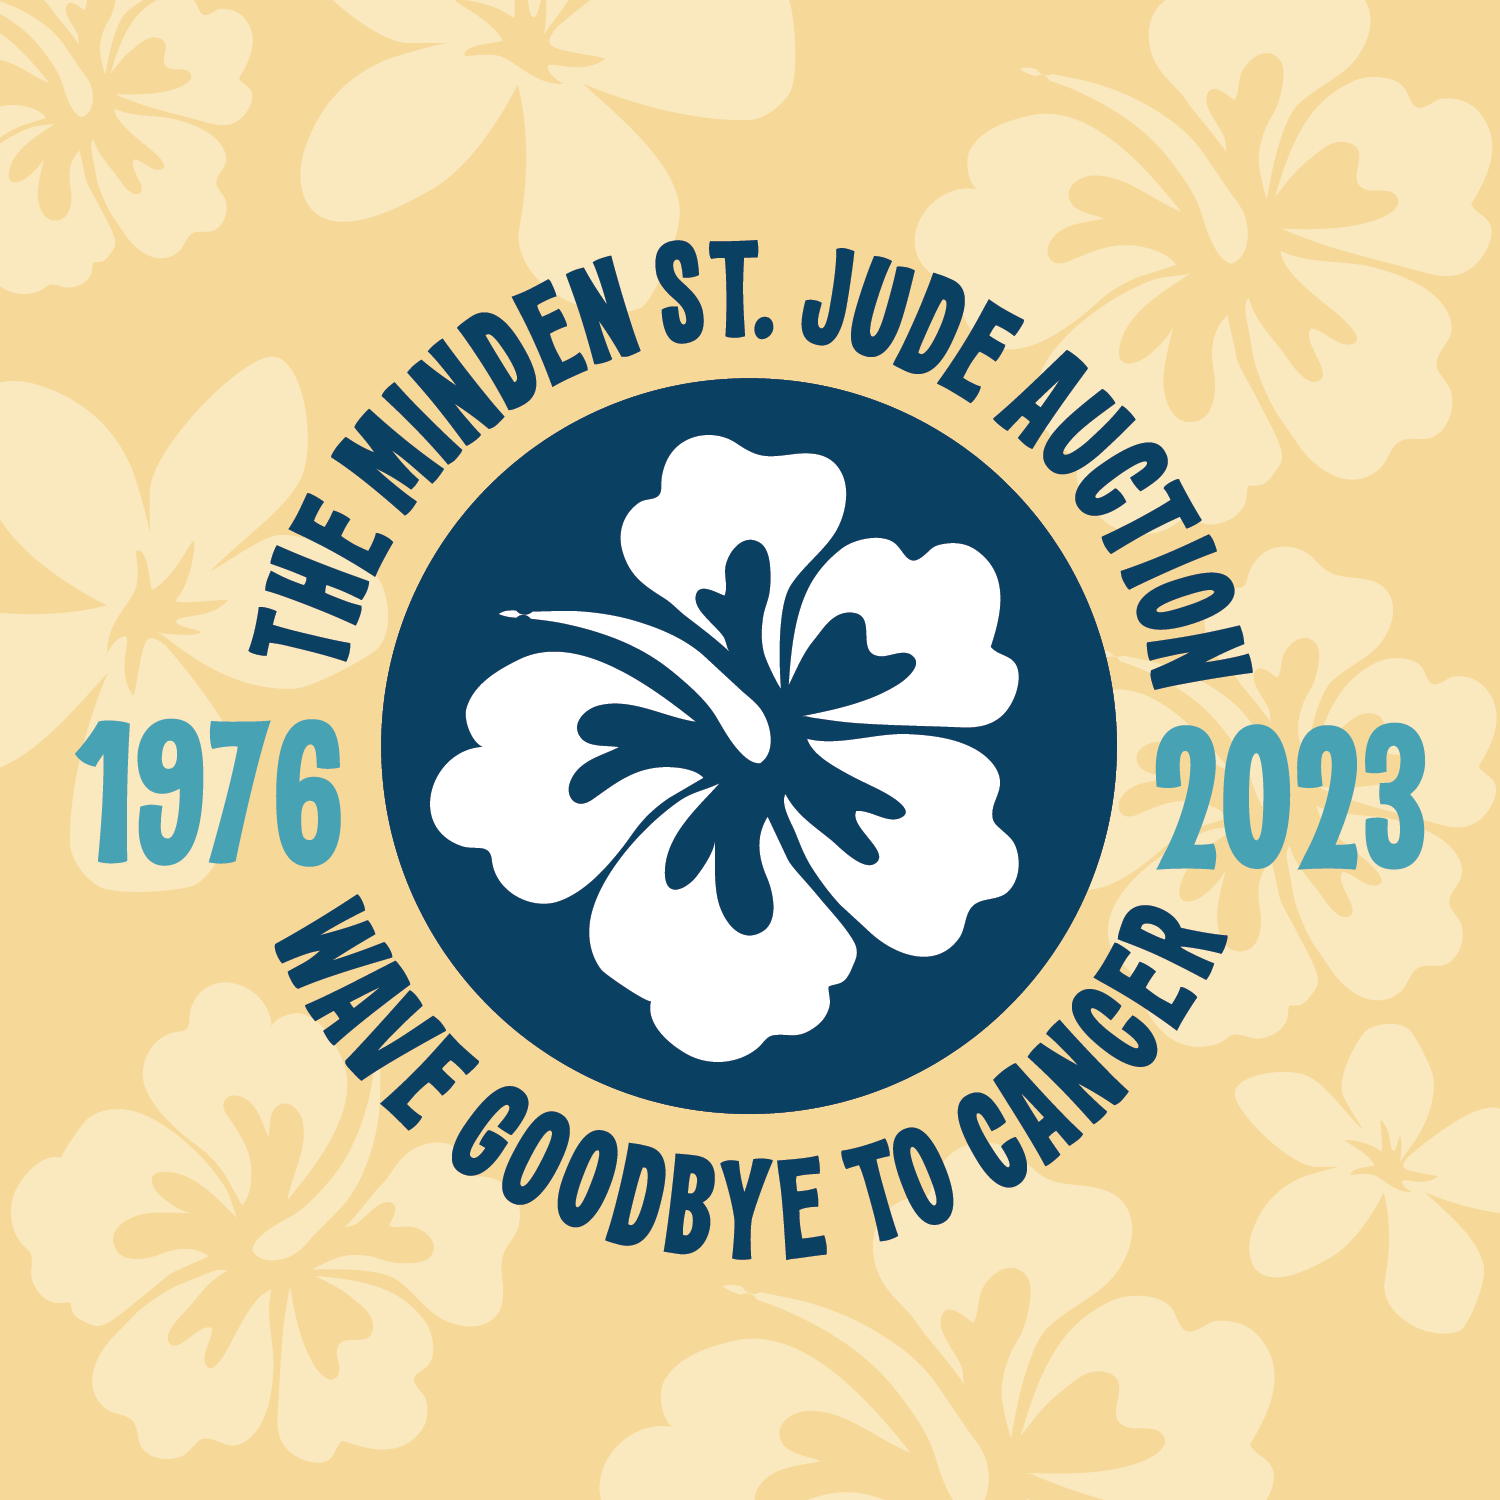 Wave Goodbye to Cancer is theme for the 2023 St. Jude Auction Minden